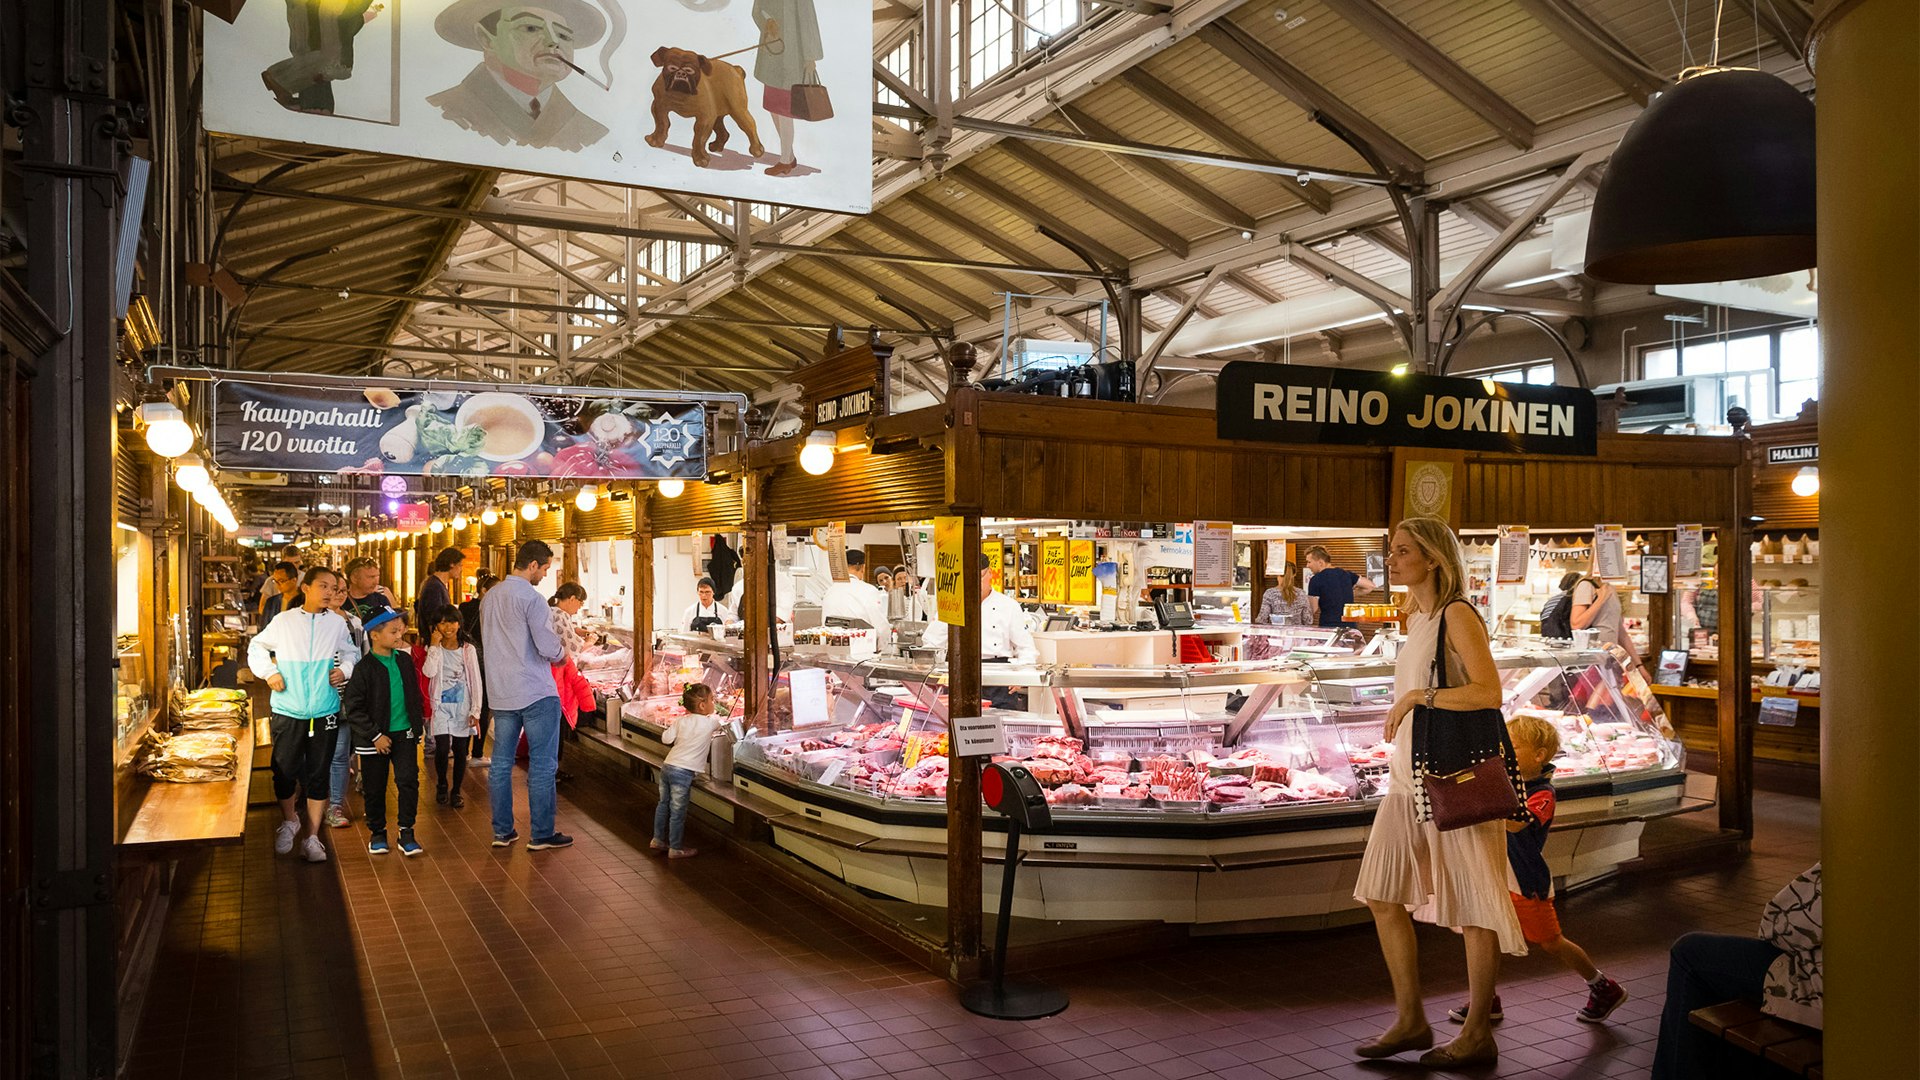 The interior of Turku Market Hall. Several vendors have stalls selling food in the vast space, and many shoppers are browsing.